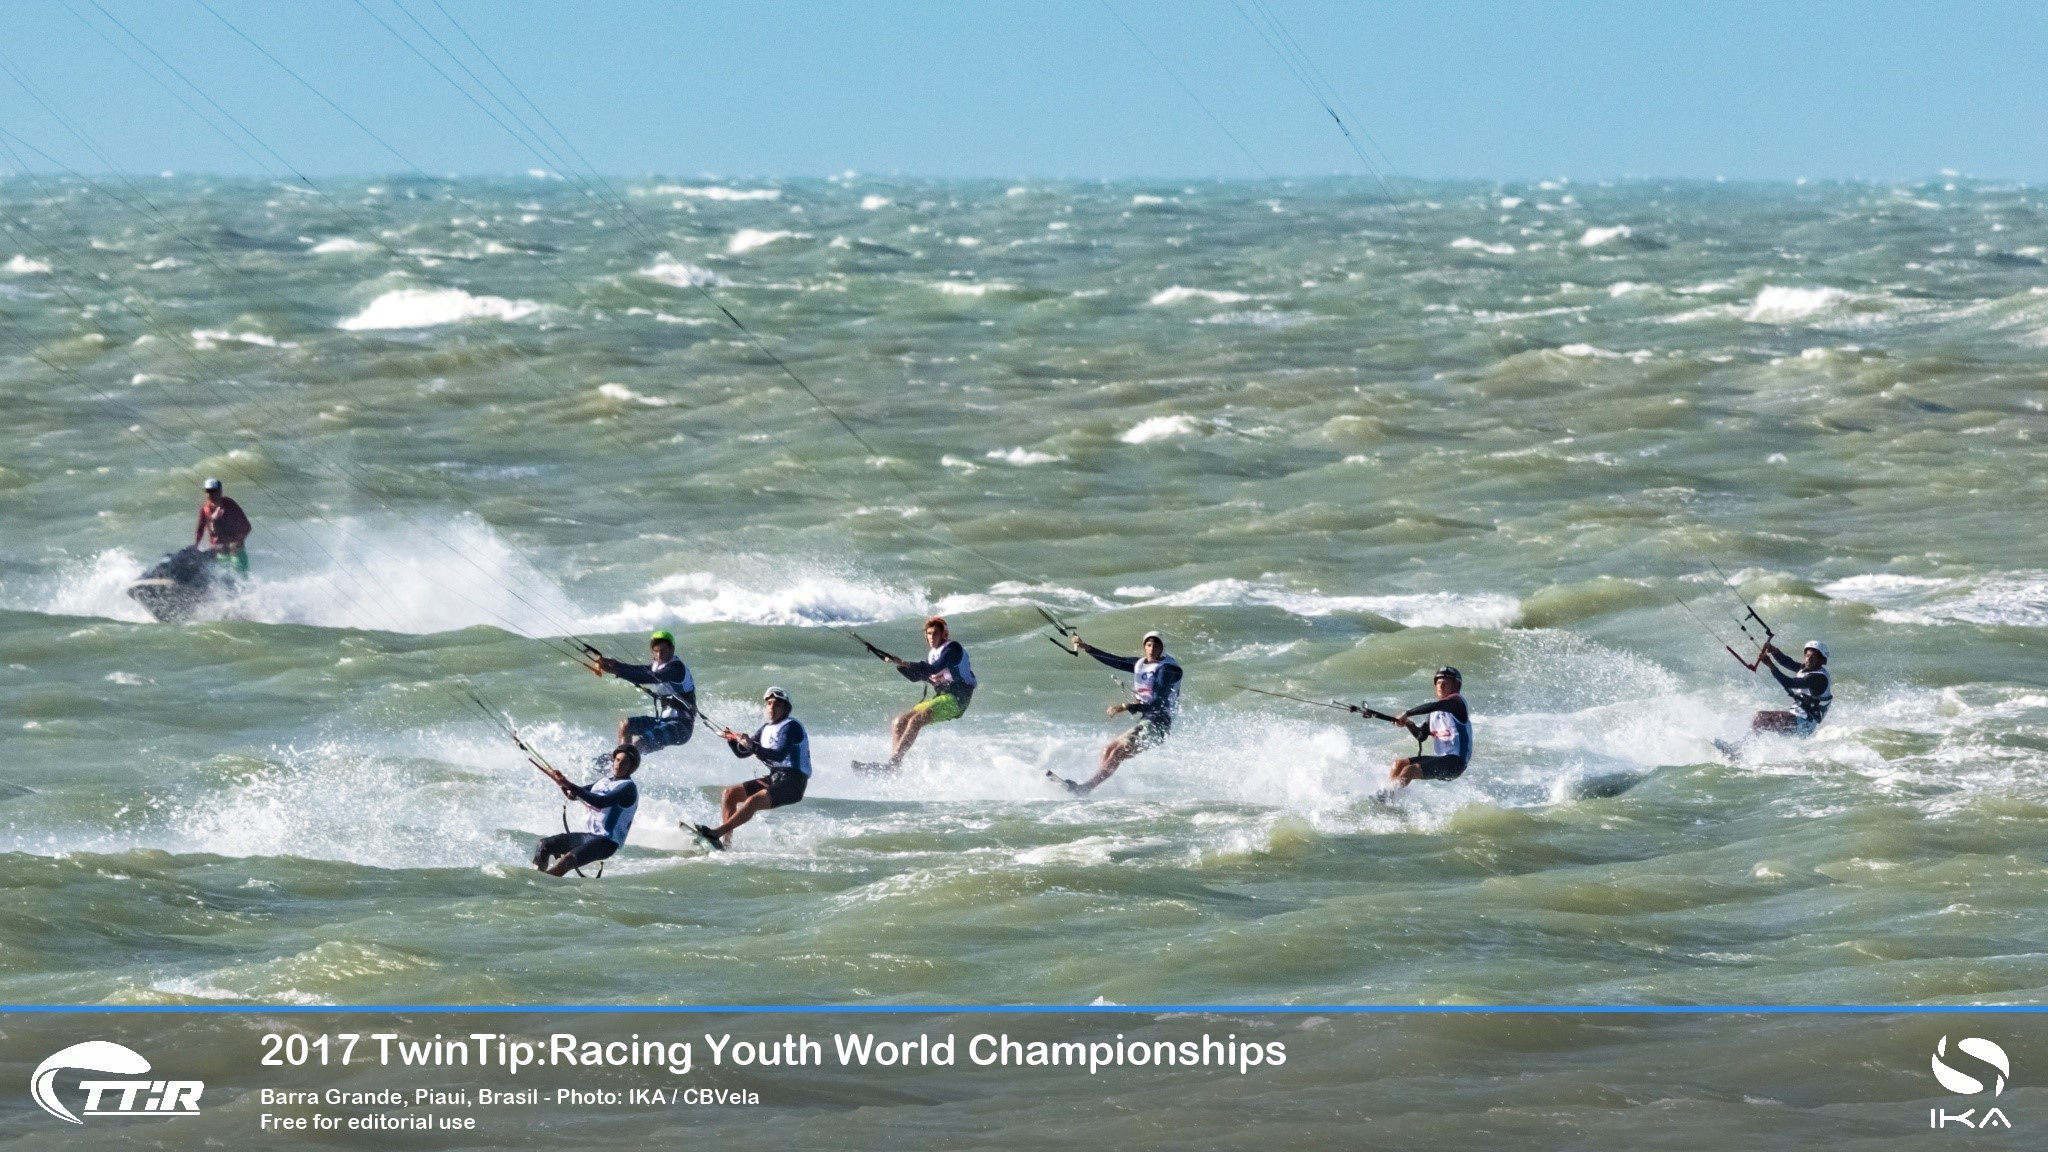 Riders were competing for qualifying spots for next year's Youth Olympic Games ©IKA